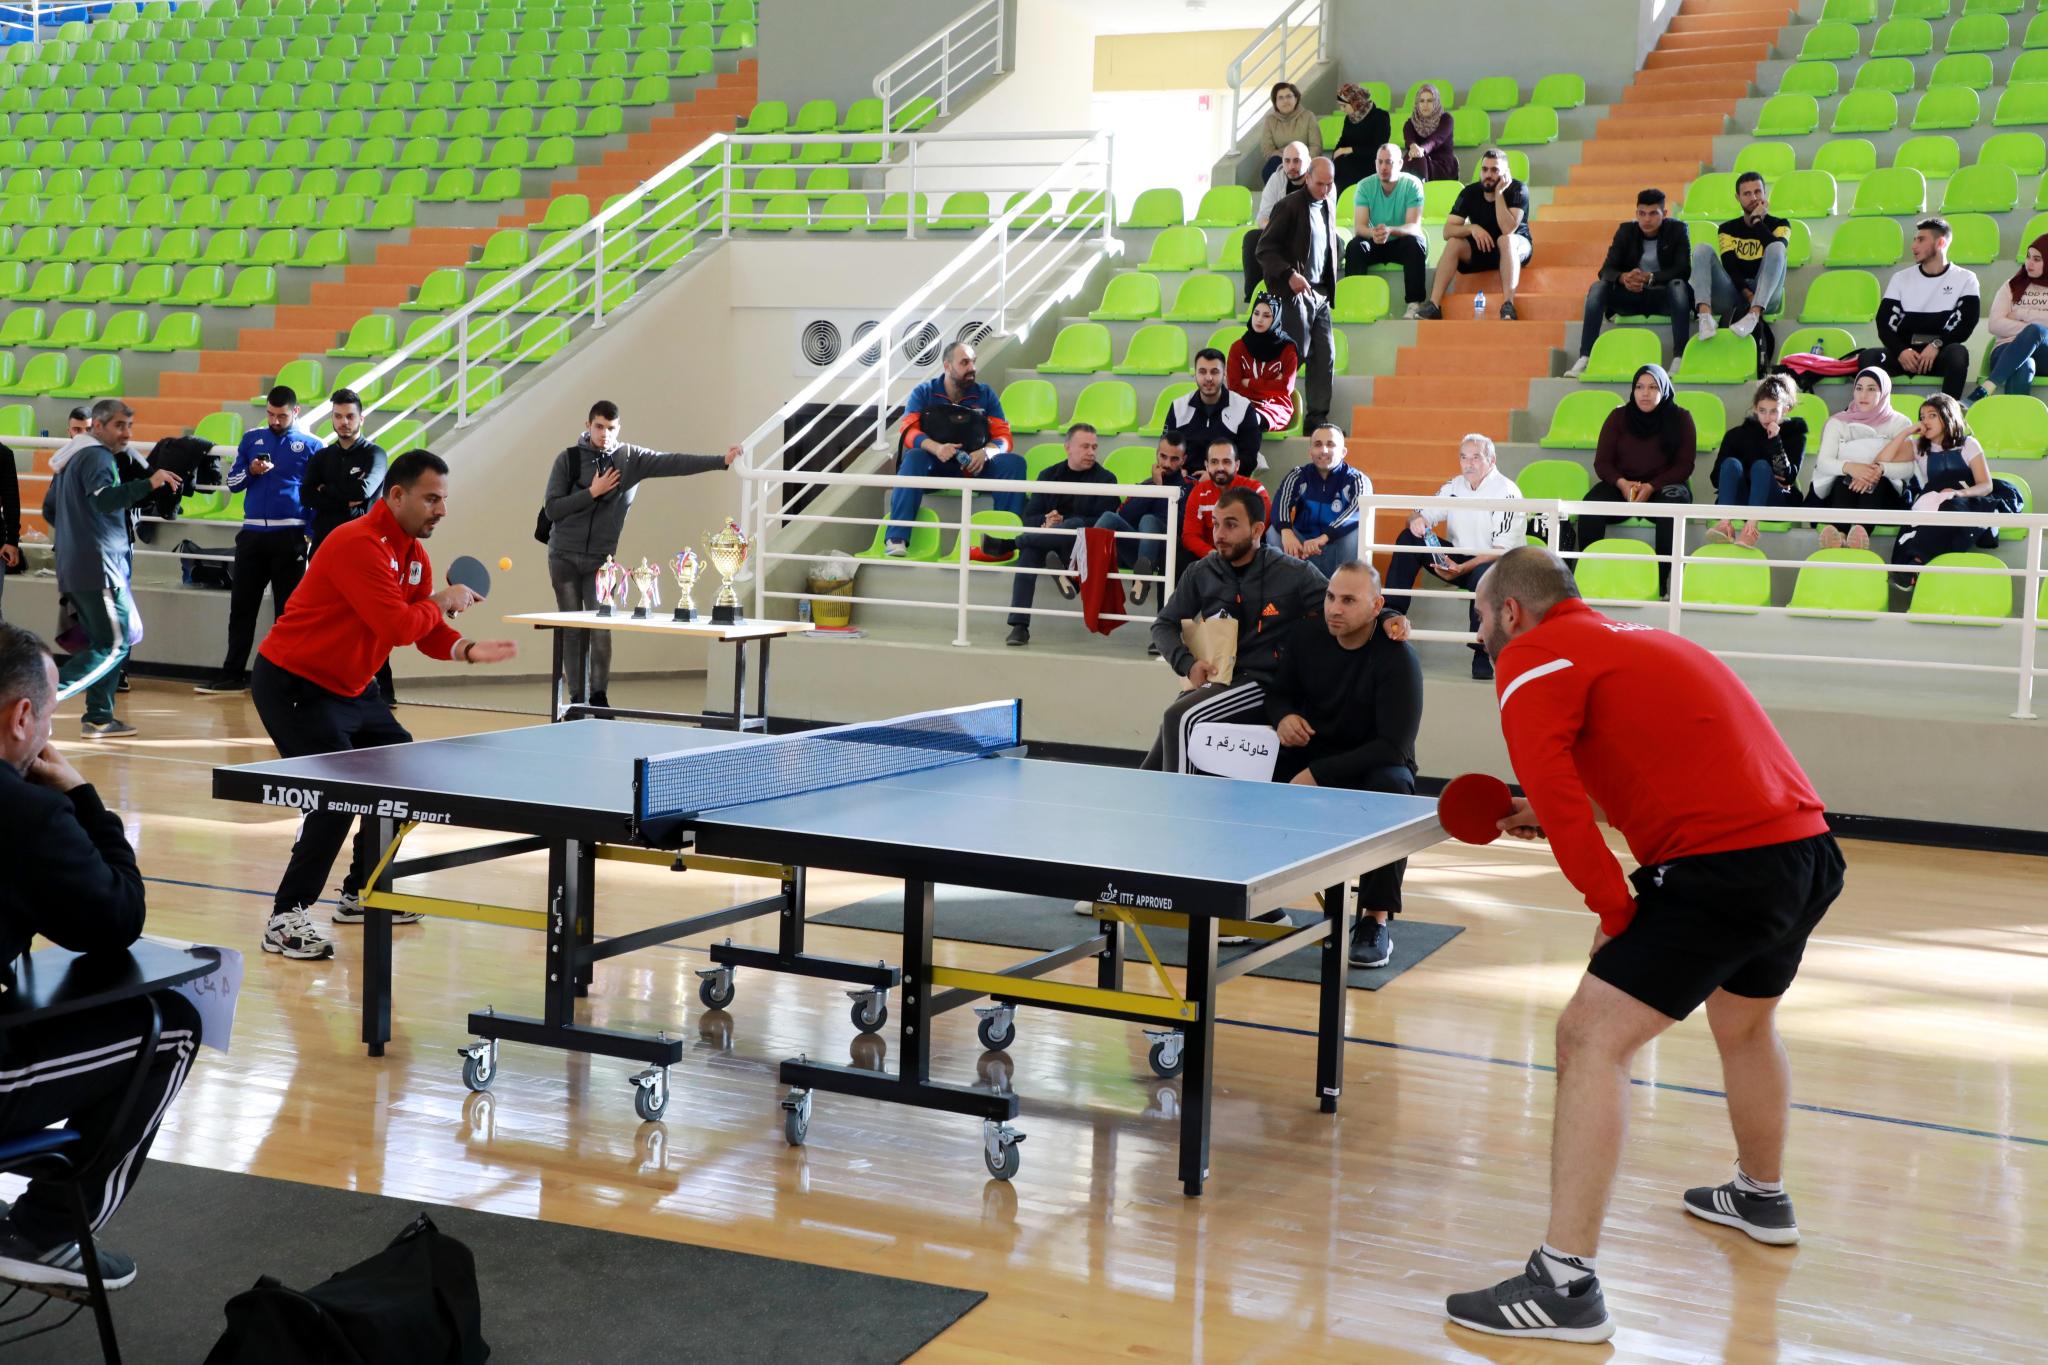 Photos of the Table Tennis Championship for University Employees